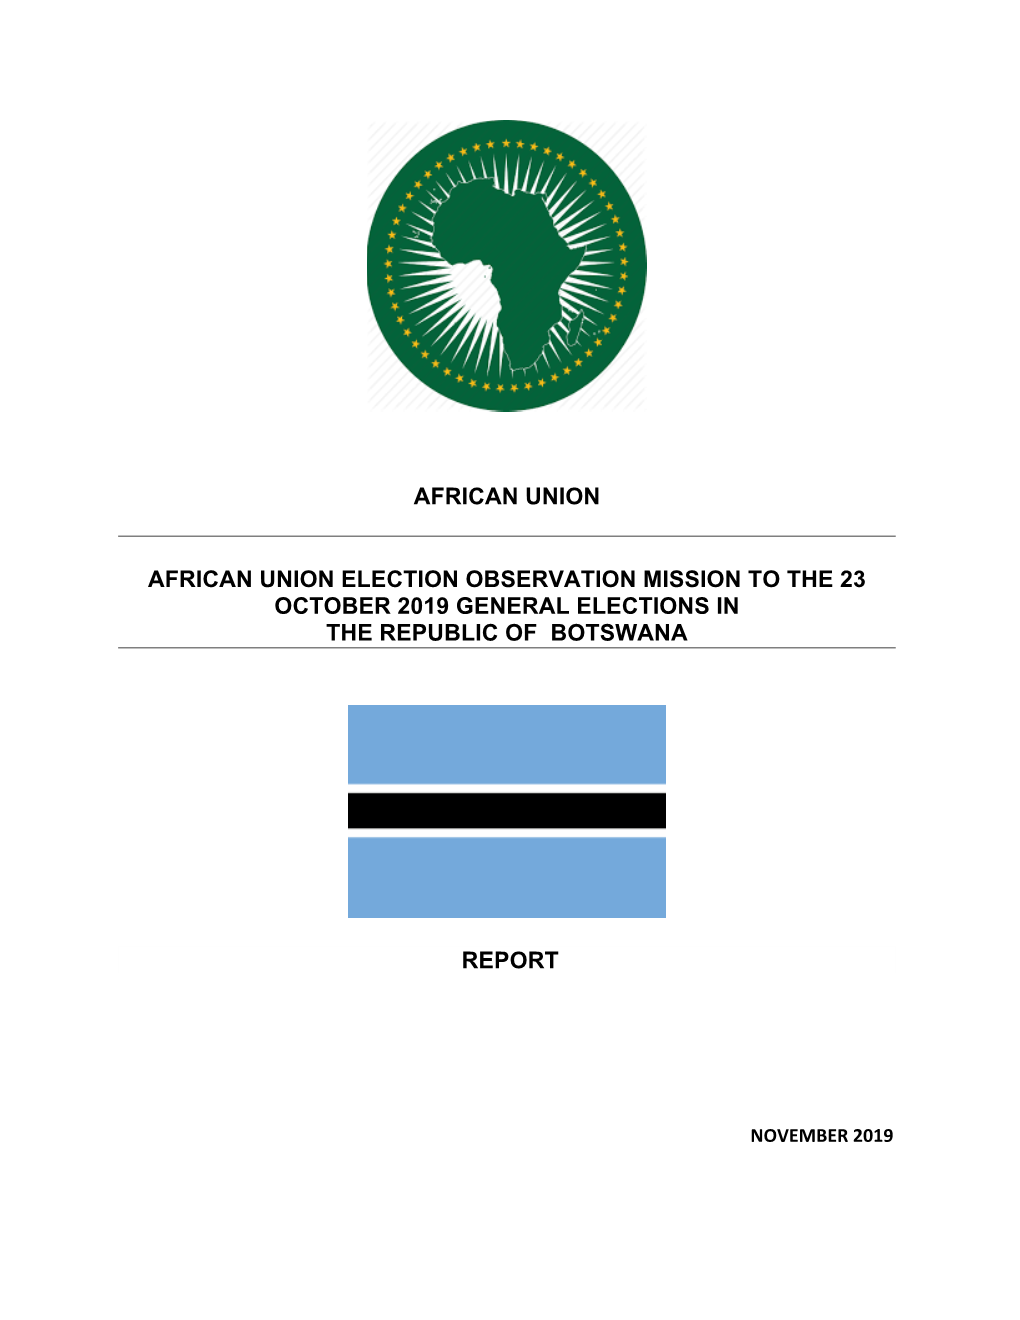 Report of the African Union Election Observation Mission to the 23